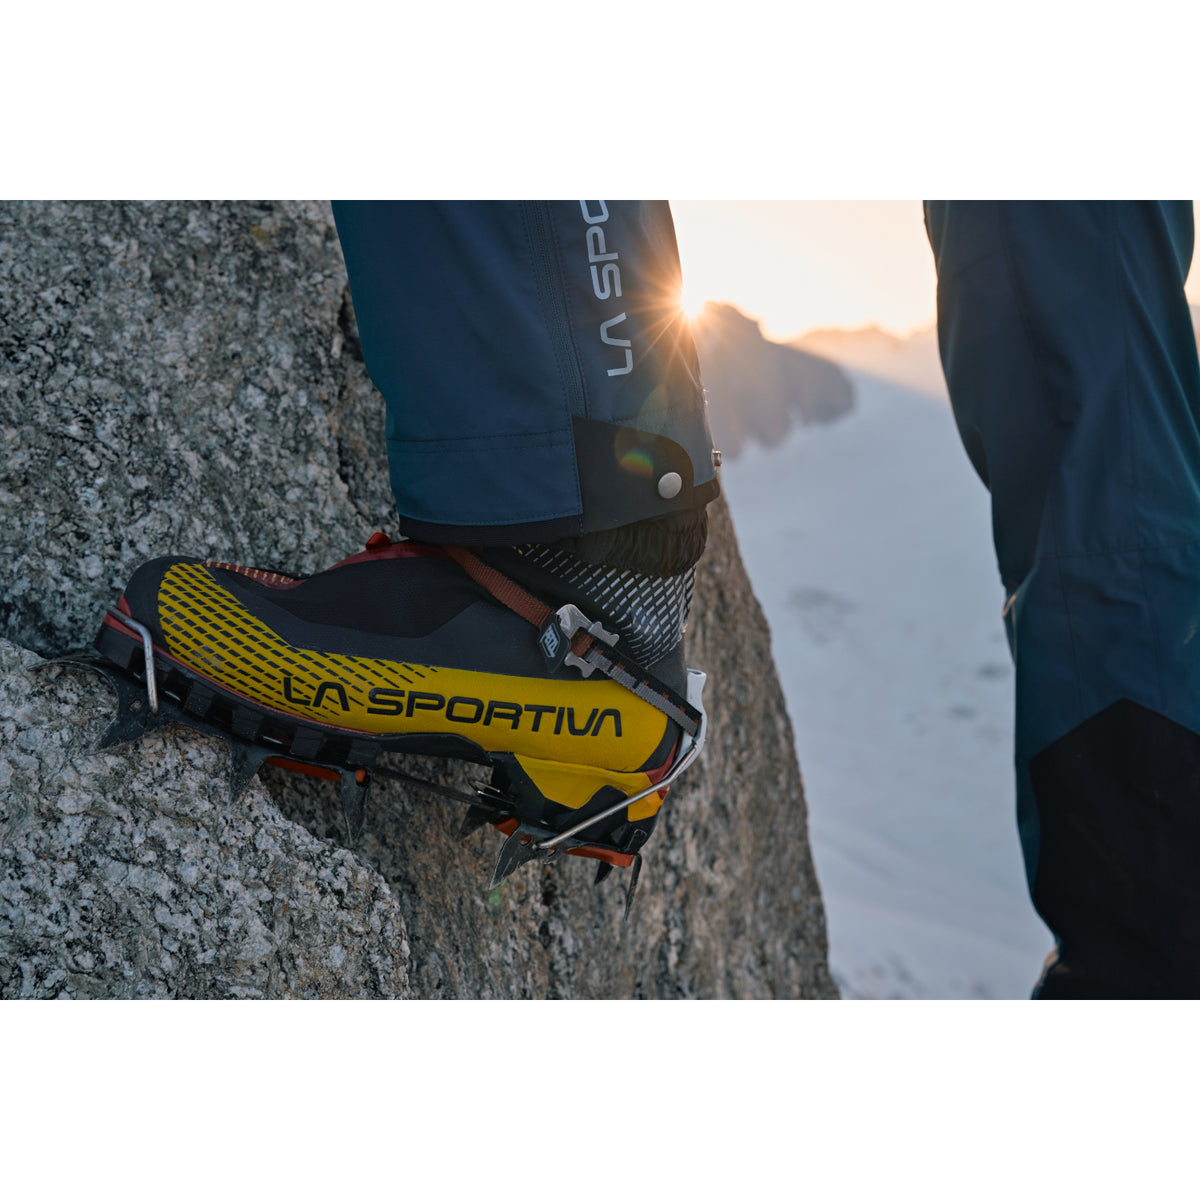 La Sportiva G-Tech mountaineering boots in black red and yellow, being used to climb in